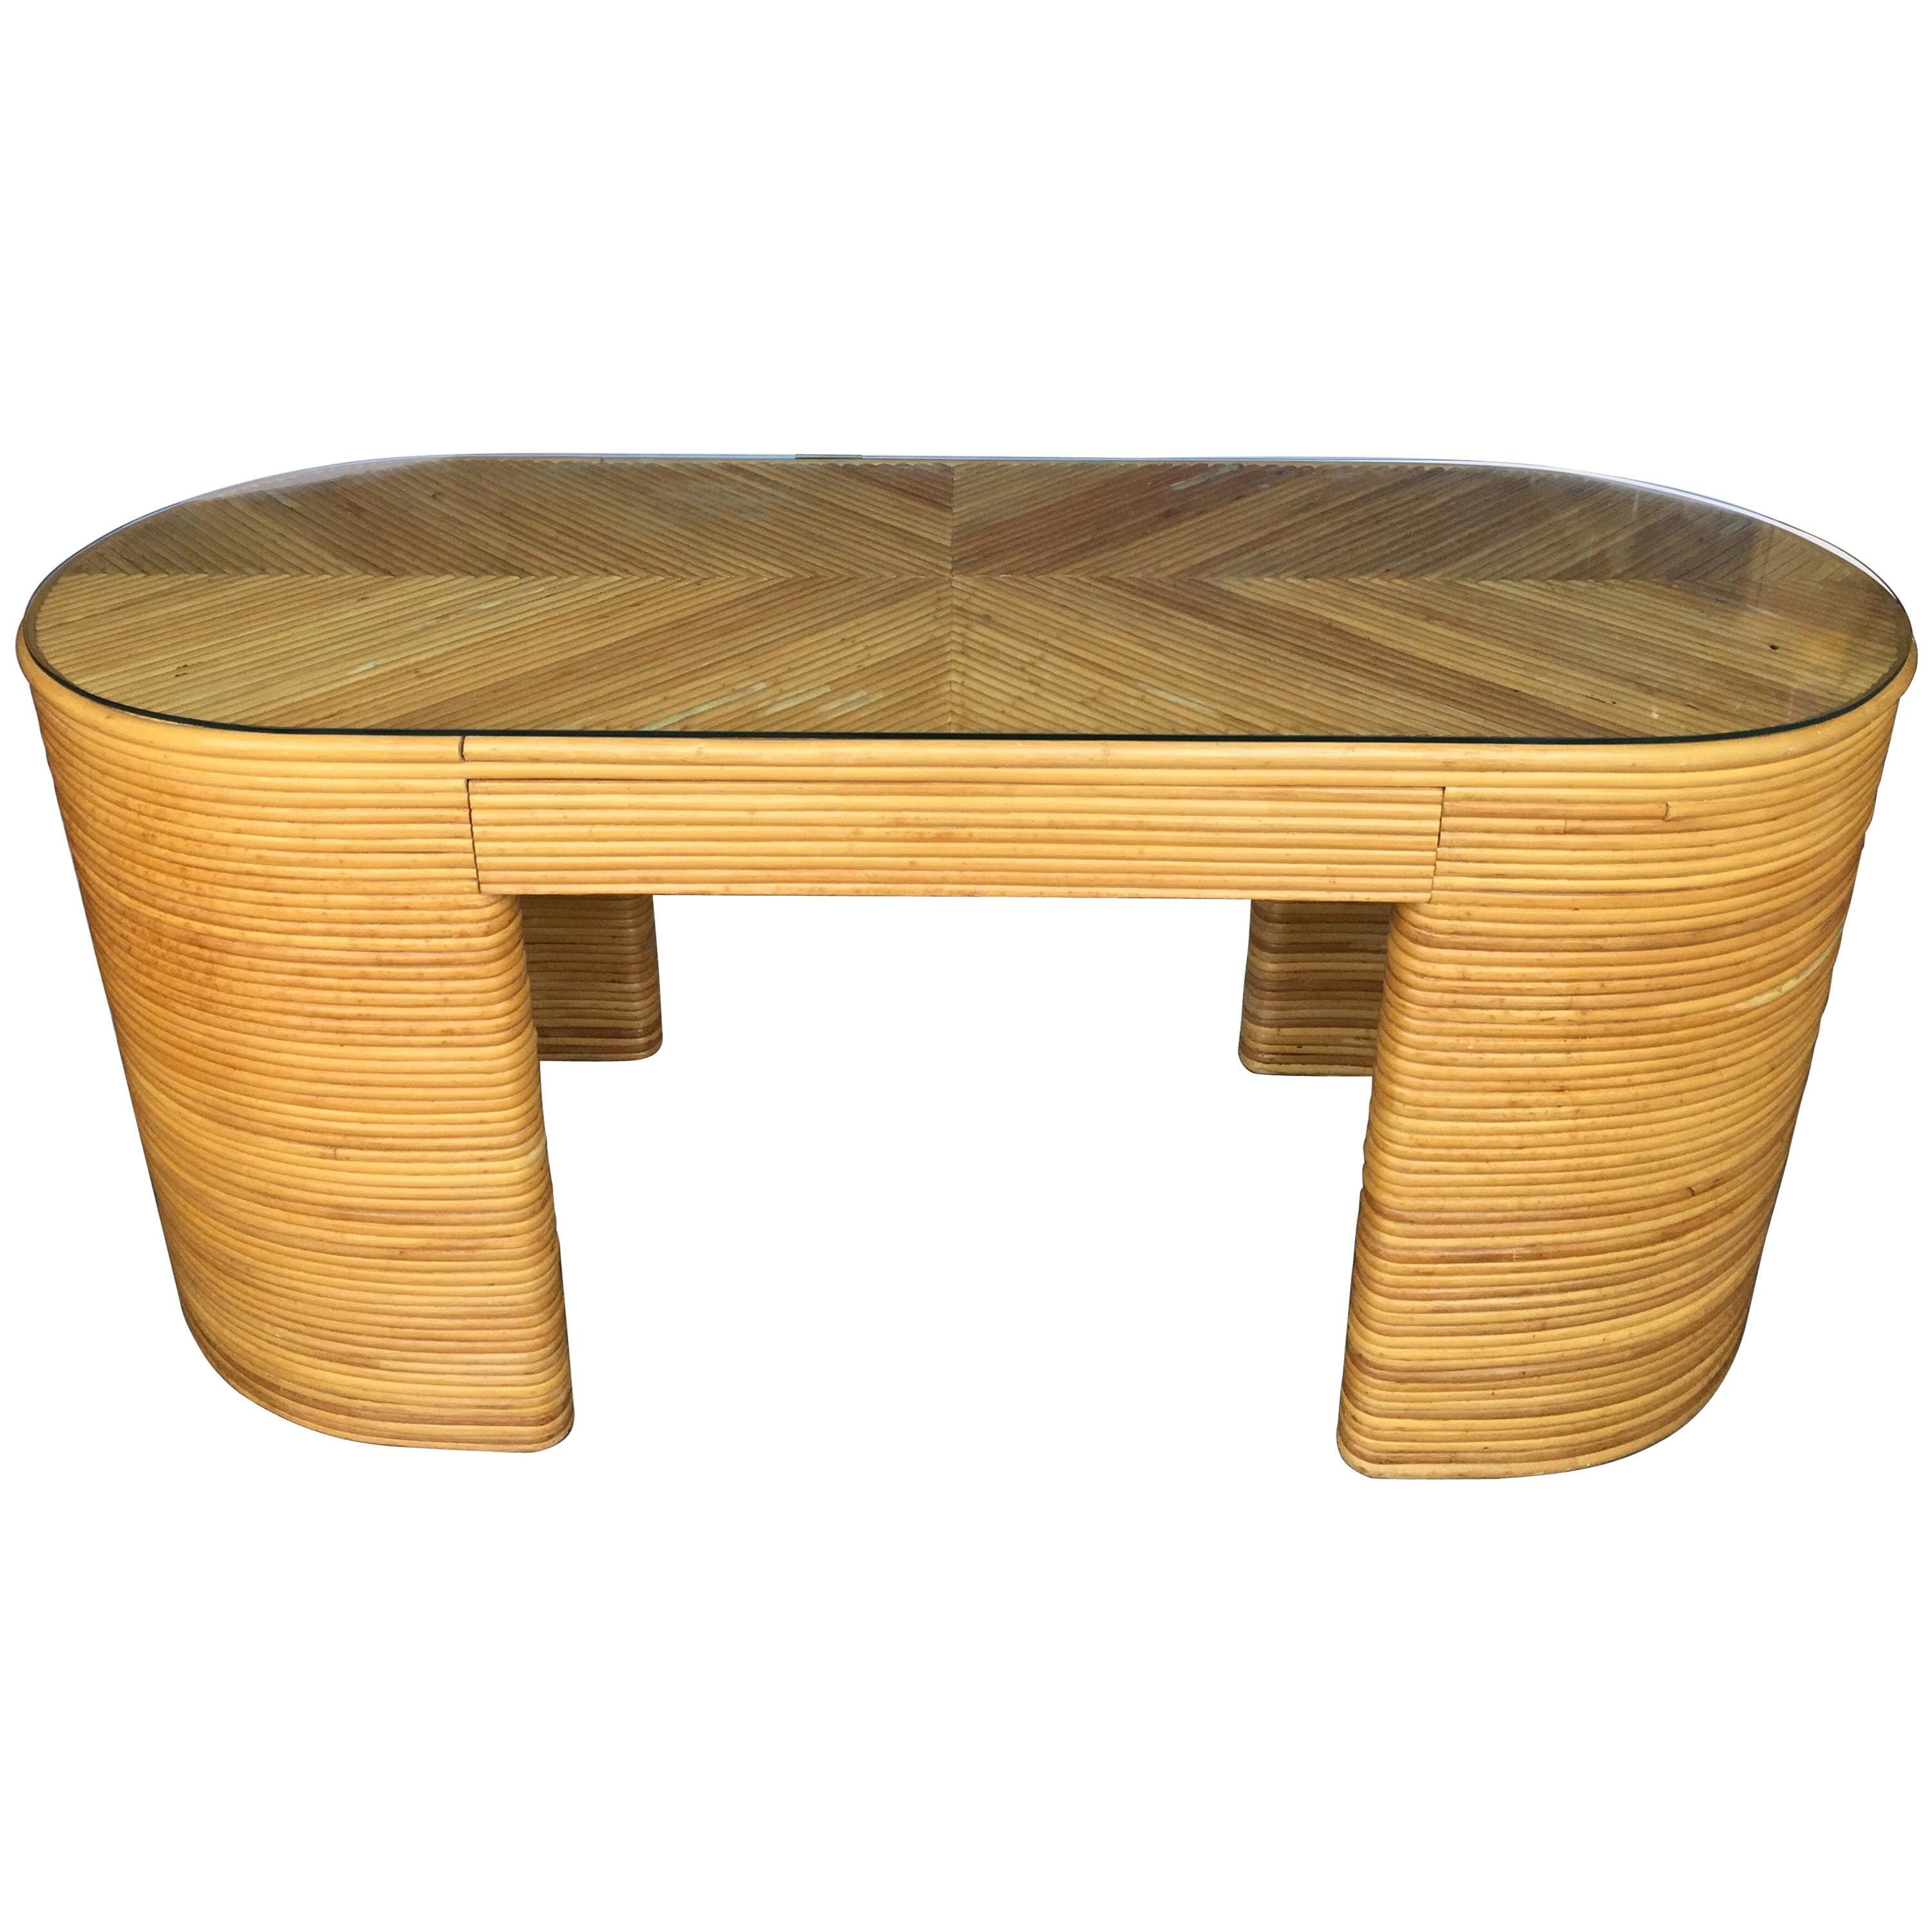 Paul Frankl Style Mid-Century Modern Sculptural Oval Reed Bamboo Desk Console